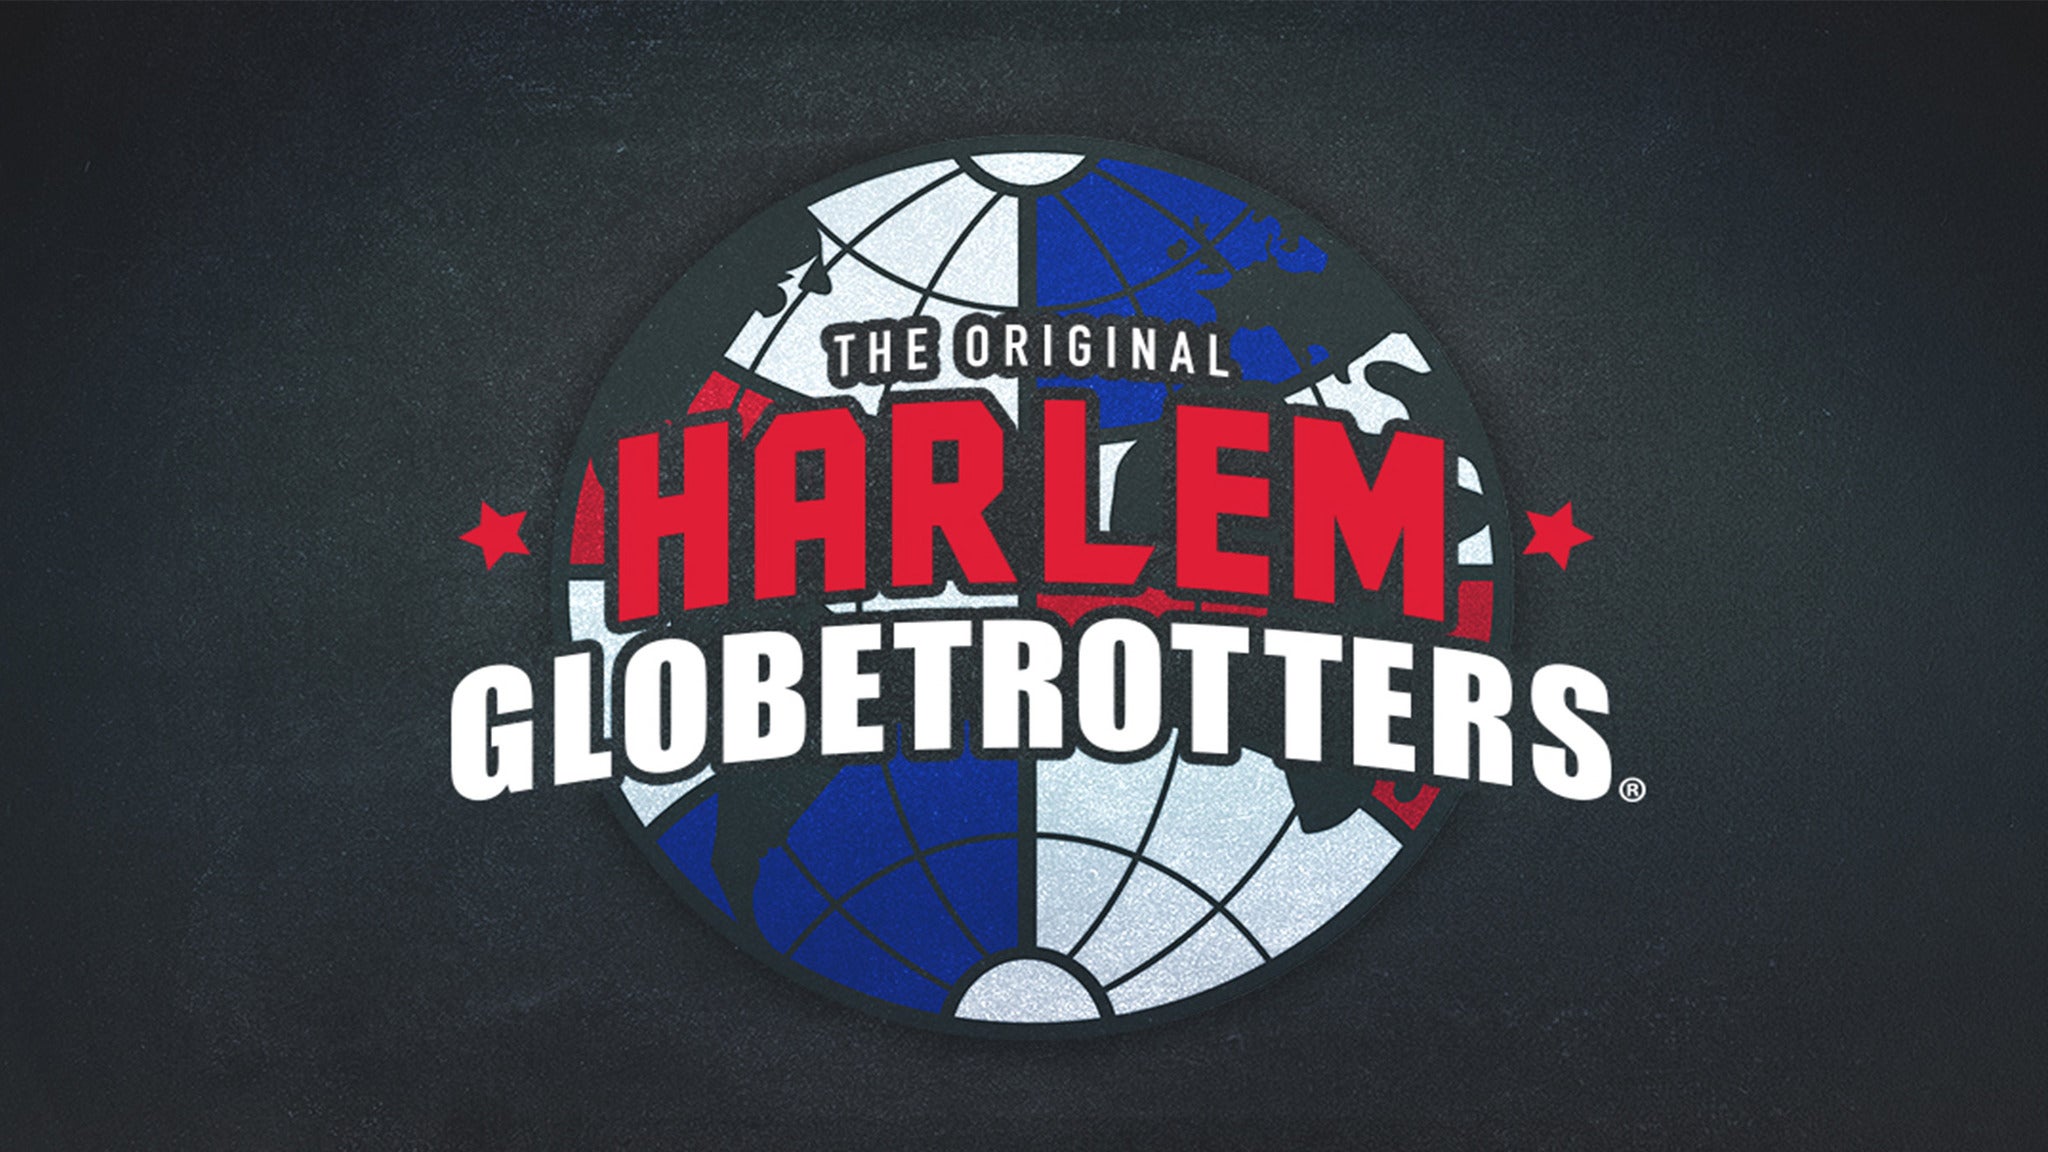 Harlem Globetrotters presale code for early tickets in Jackson